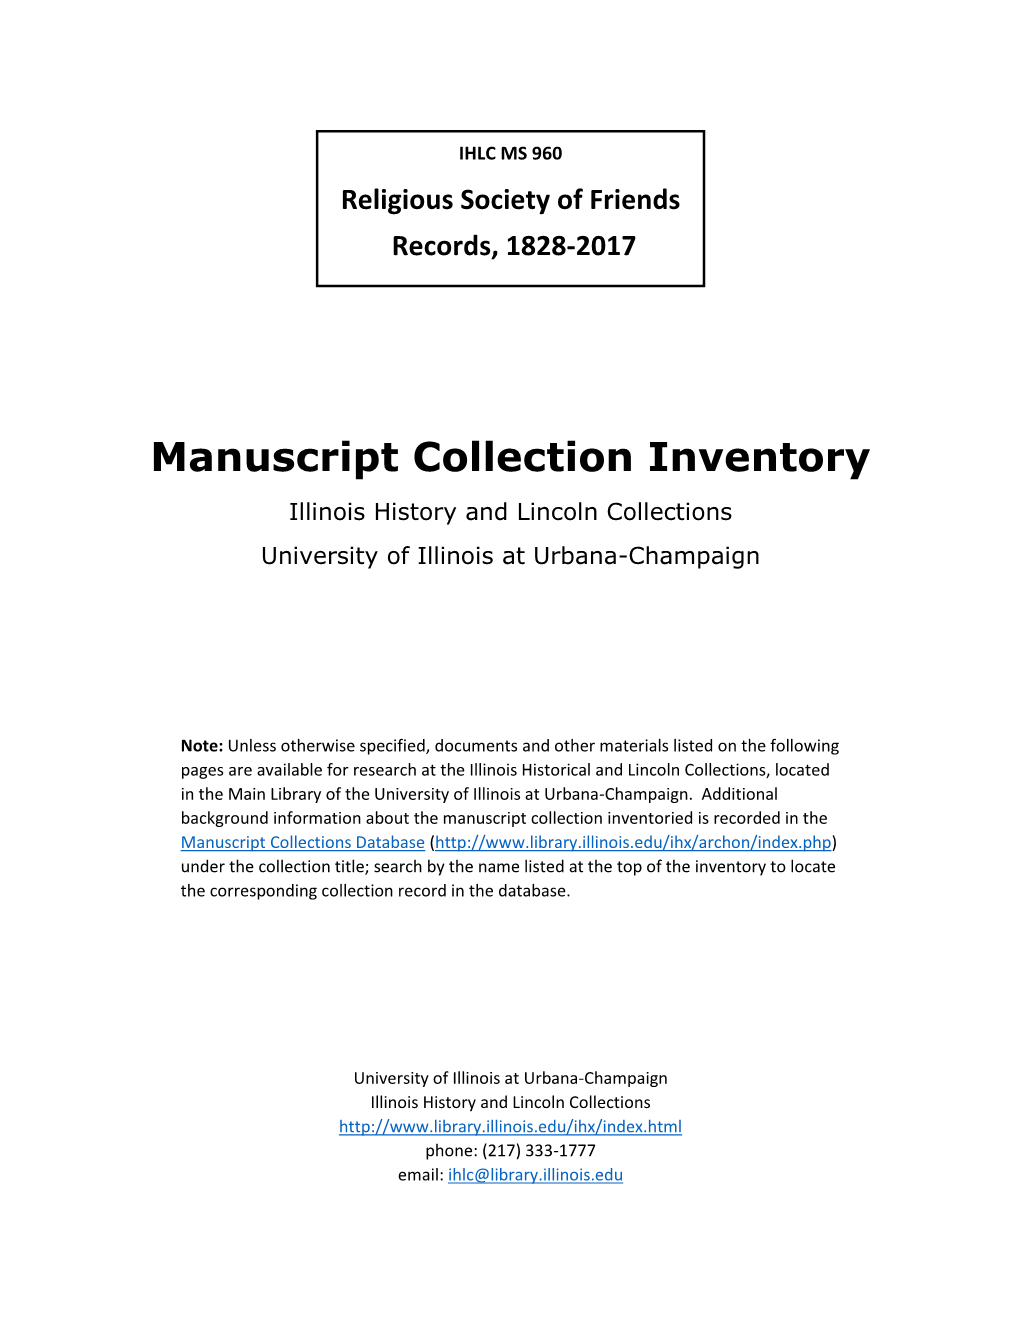 Religious Society of Friends Records, 1828-2017